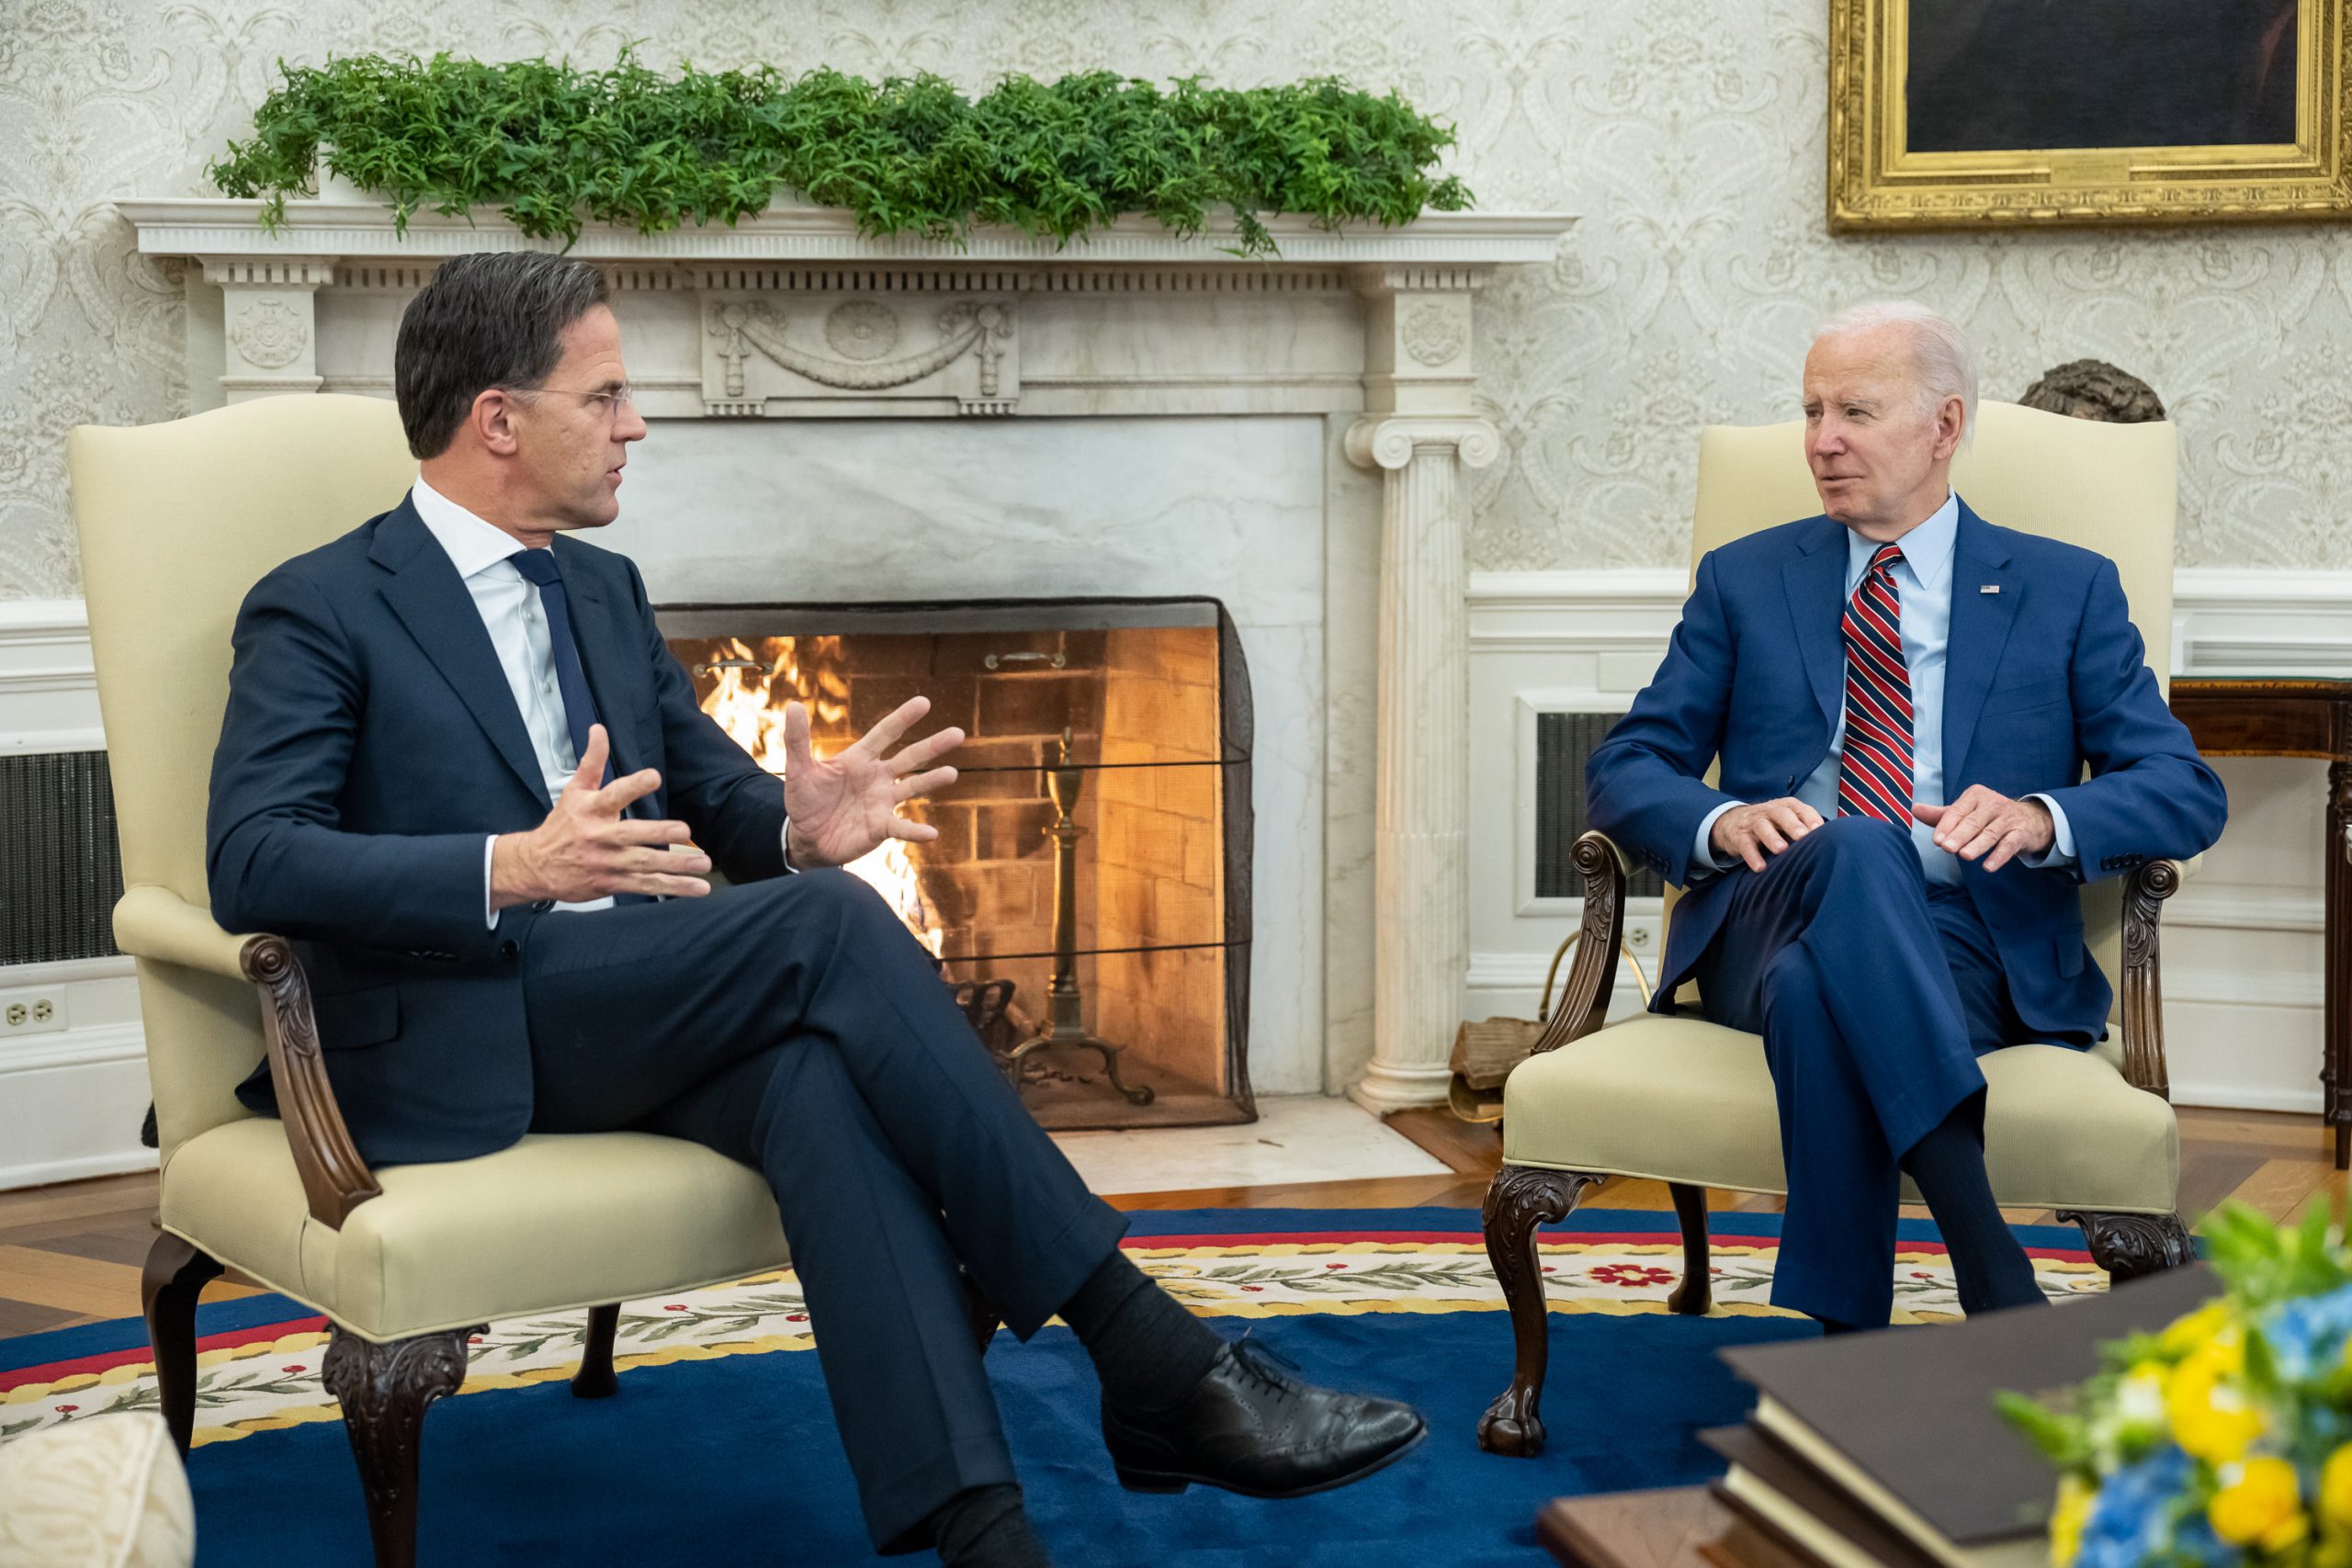 Photo: US President Joe Biden meets with Prime Minister Mark Rutte of the Netherlands, Tuesday, January 17, 2023, in the Oval Office. Credit: White House Photo by Adam Schultz